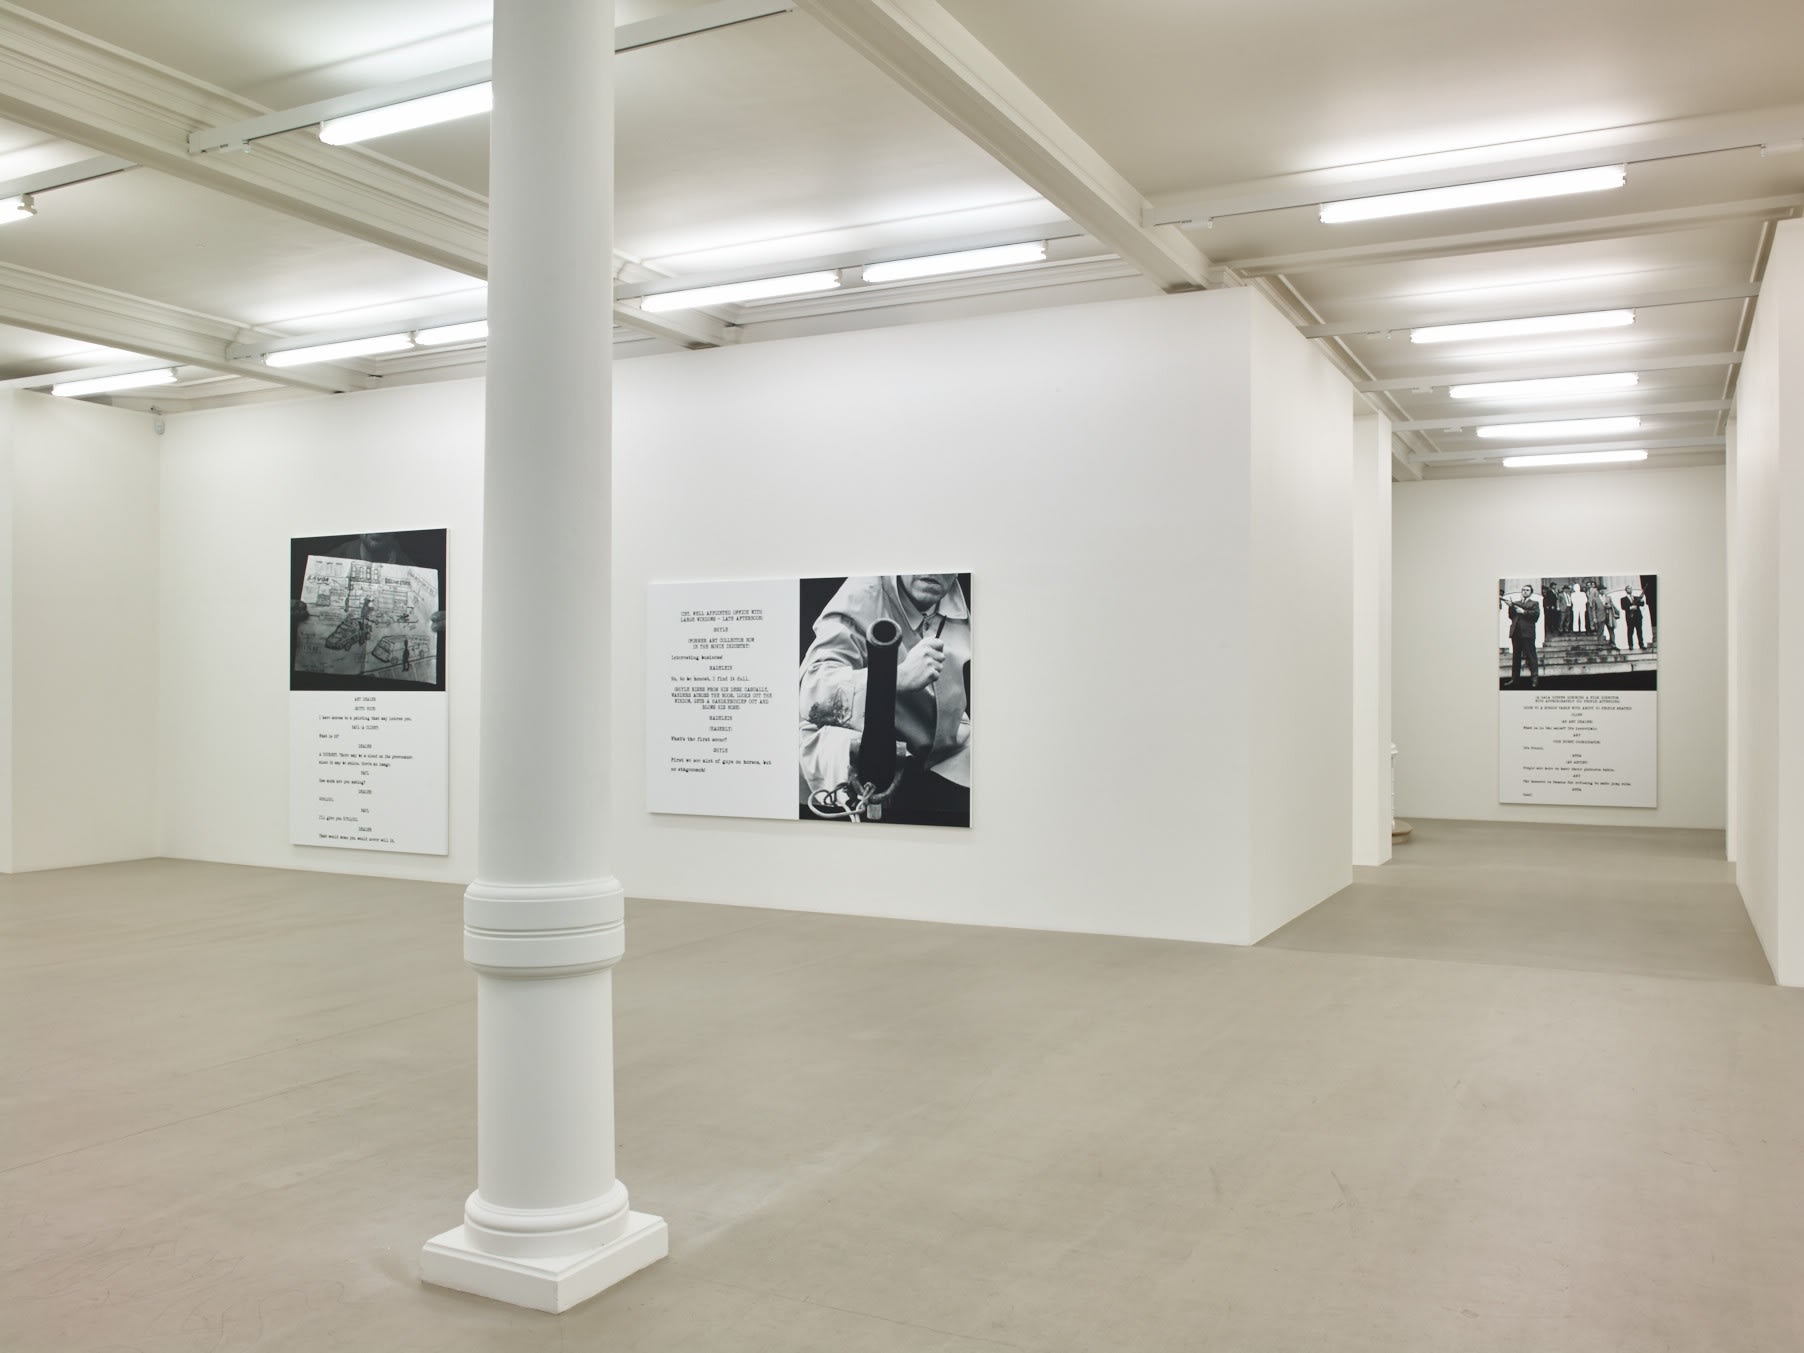 In a large white space with columns, 3 large paintings hang. Each are roughly half image and half text, which is in the format of a film script.